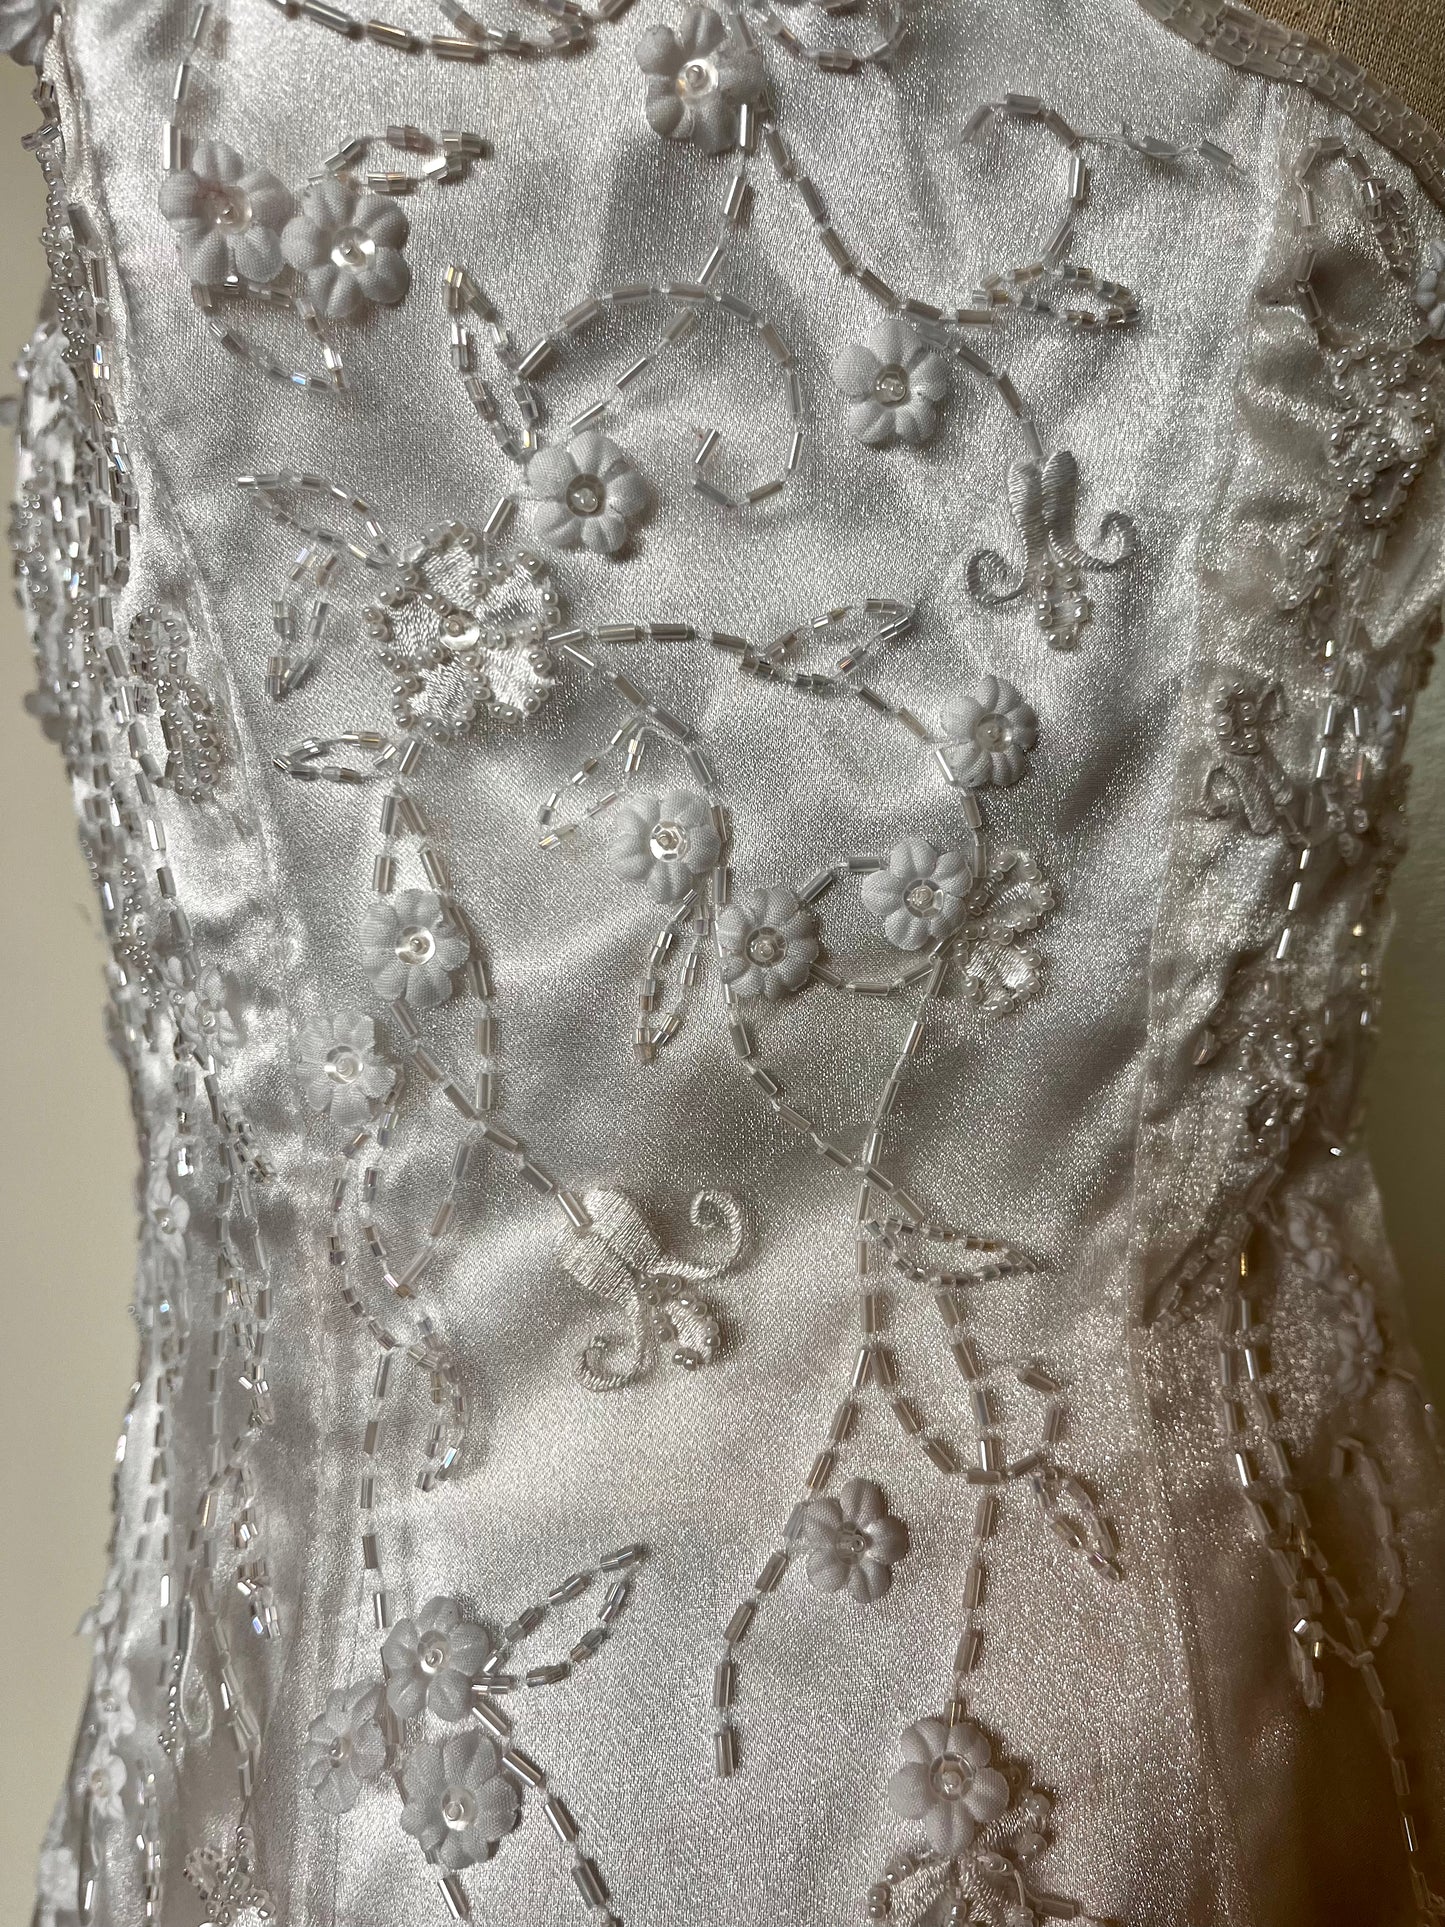 Vintage Y2K "Nina Caccini" White Flowers Beaded Gown